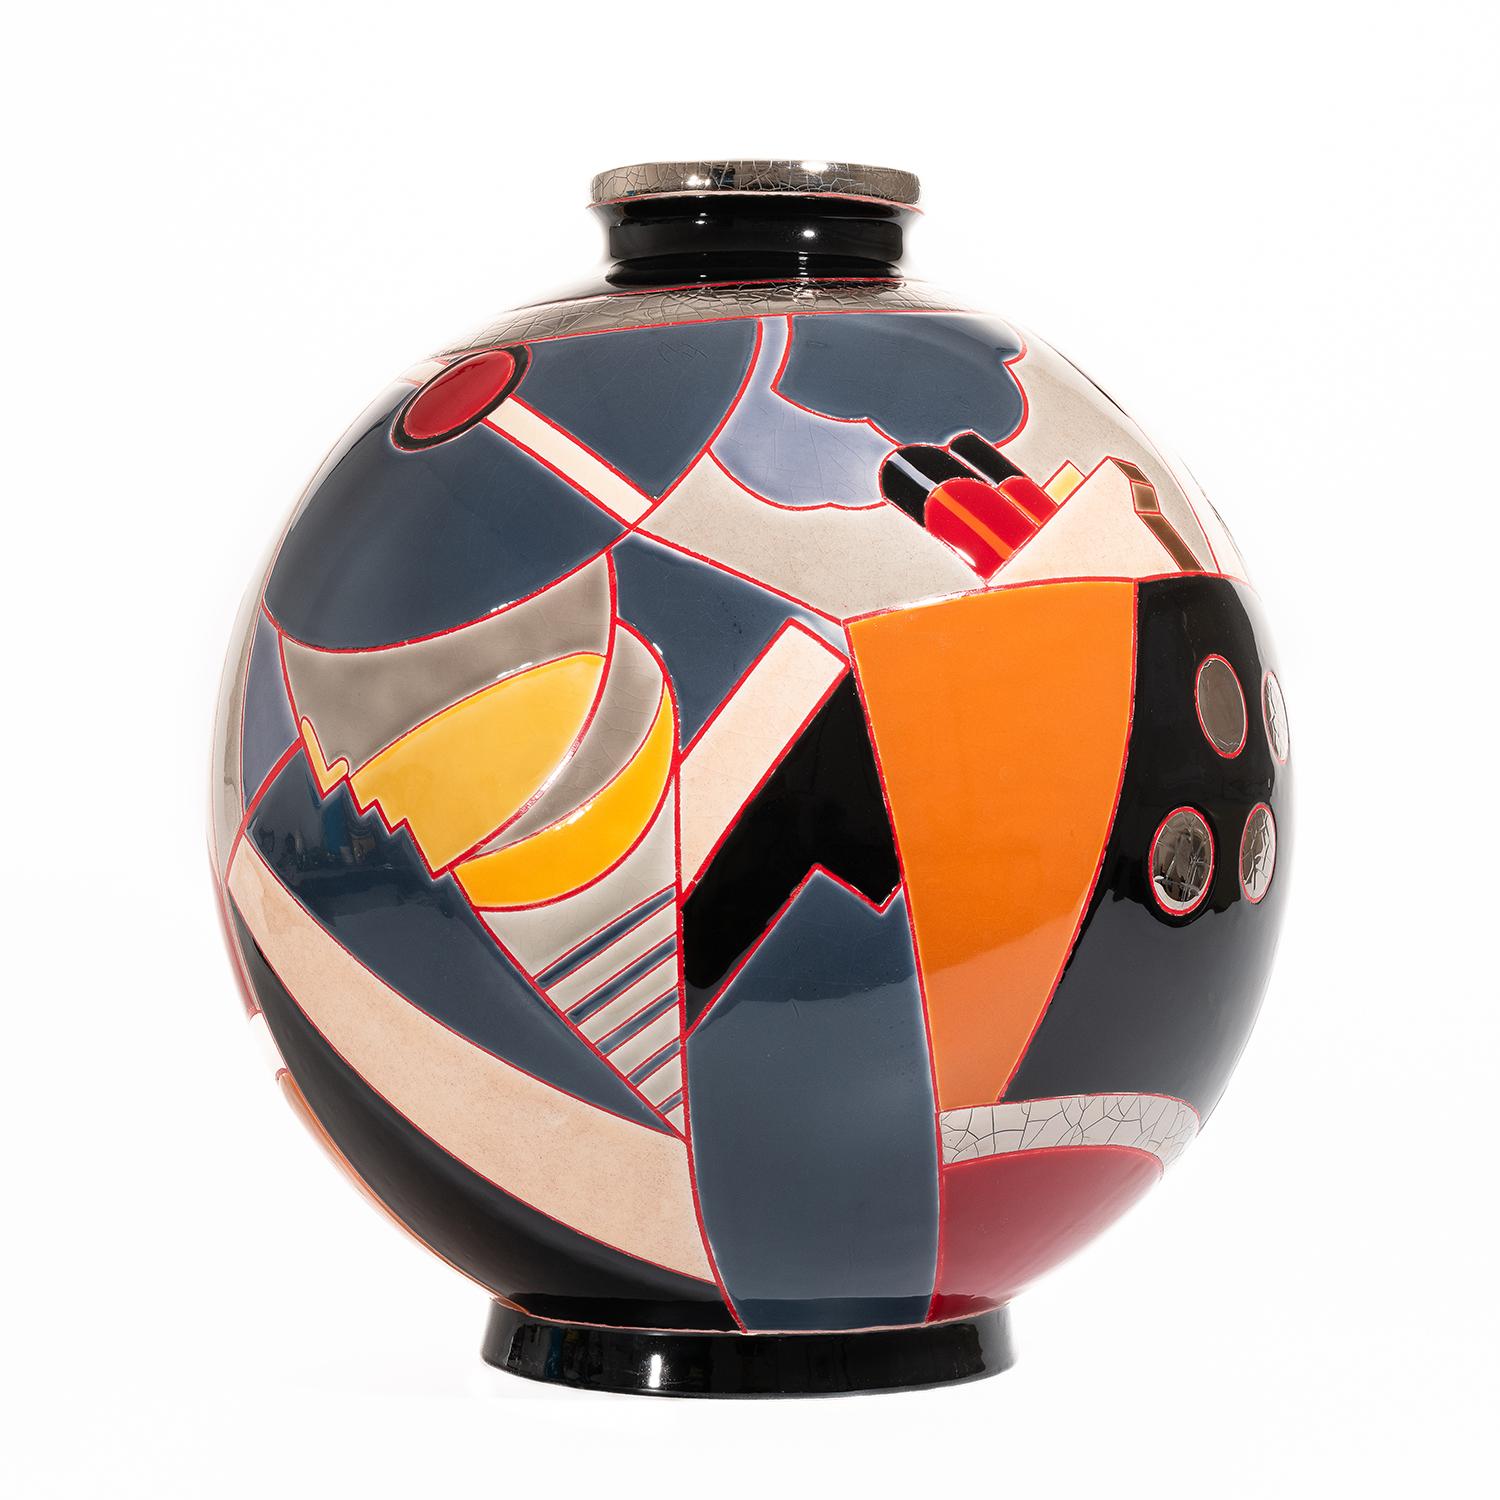 Vase Beauty and the sailor all in enameled earthenware,
Emaux de Longwy made in France, limited edition of 50 items.